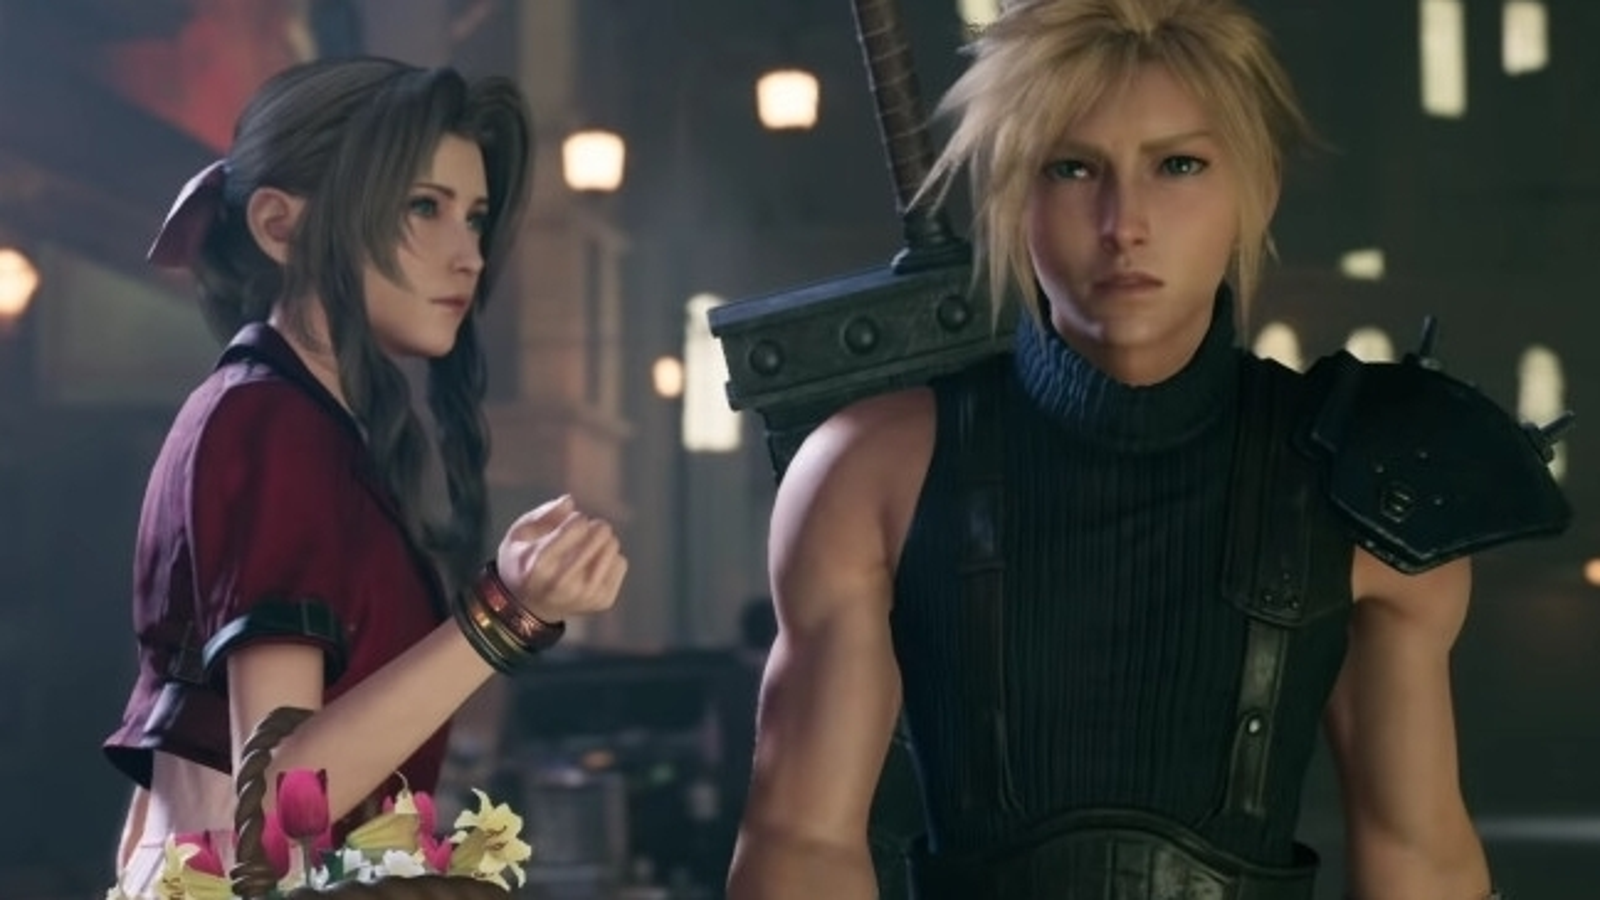 Final Fantasy 7 Remake Finally Coming To Xbox!? Microsoft Is